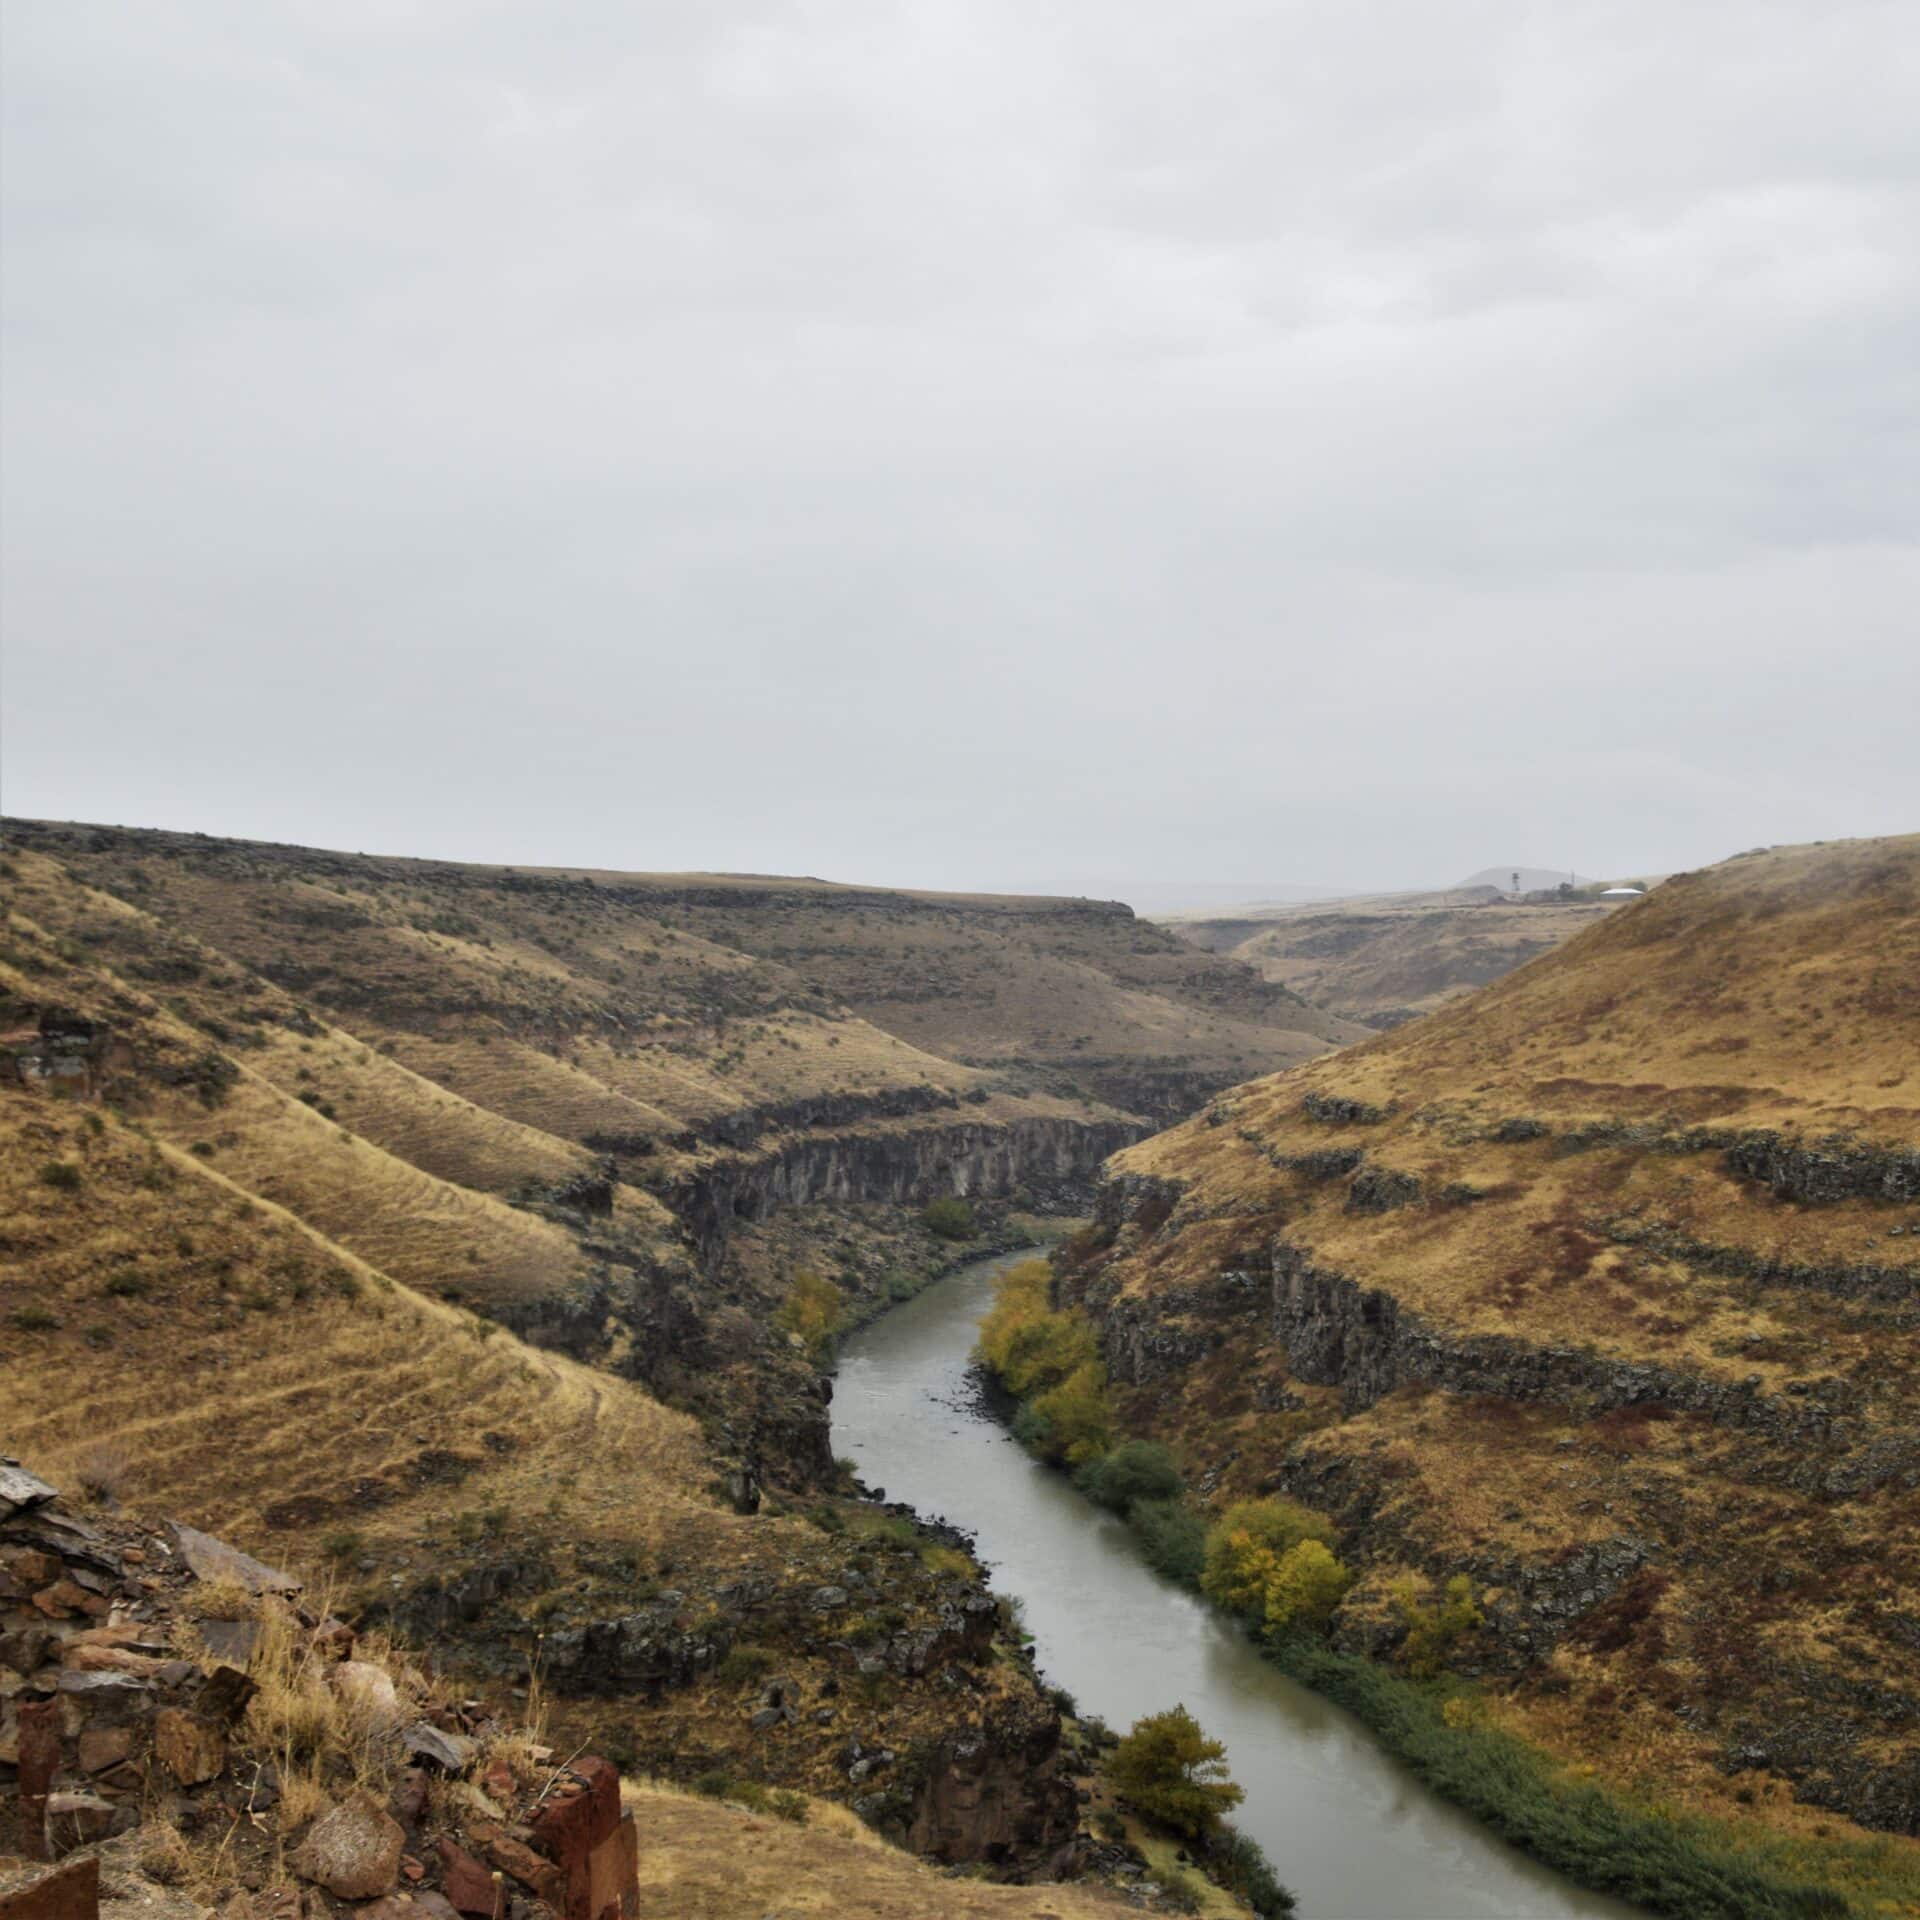 a mighty river rusn through a wide canyon separating Armenia and Turkey